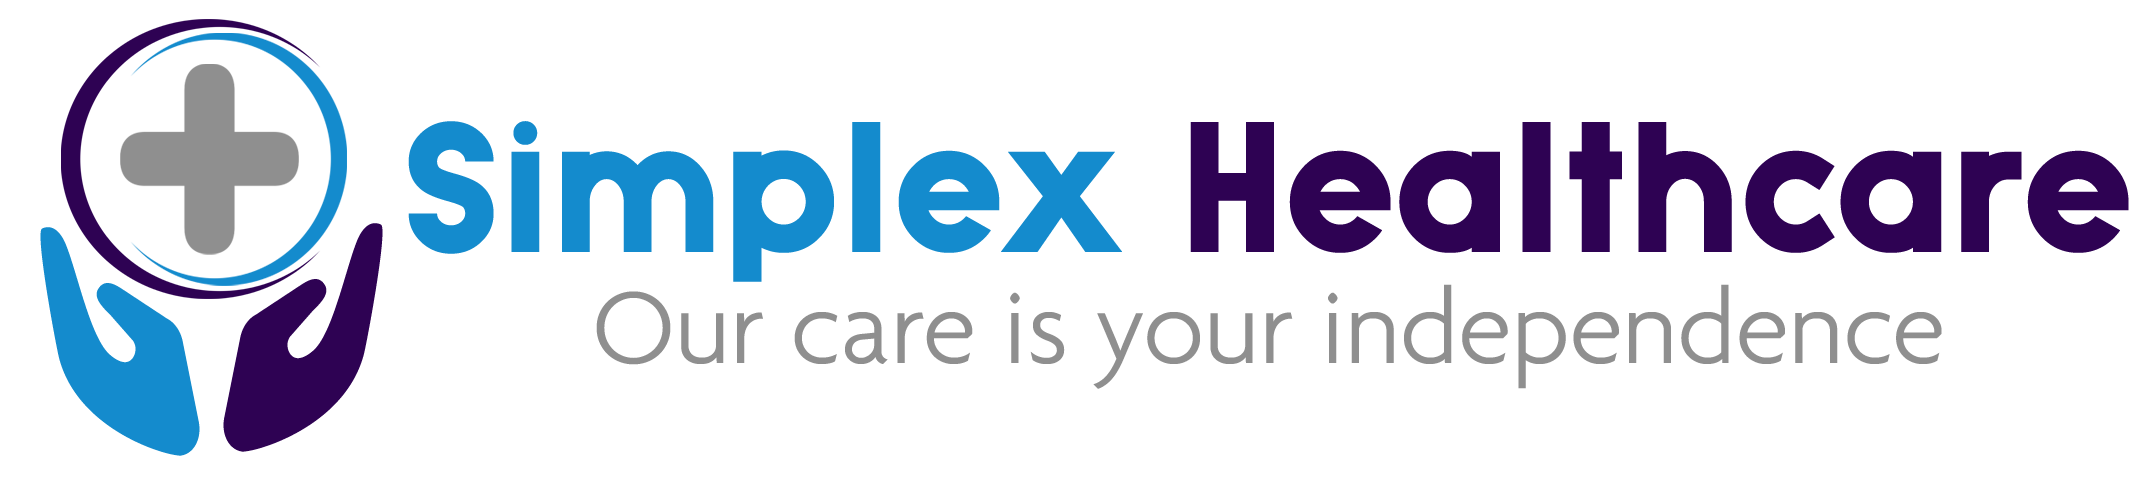 Simplex Healthcare Limited